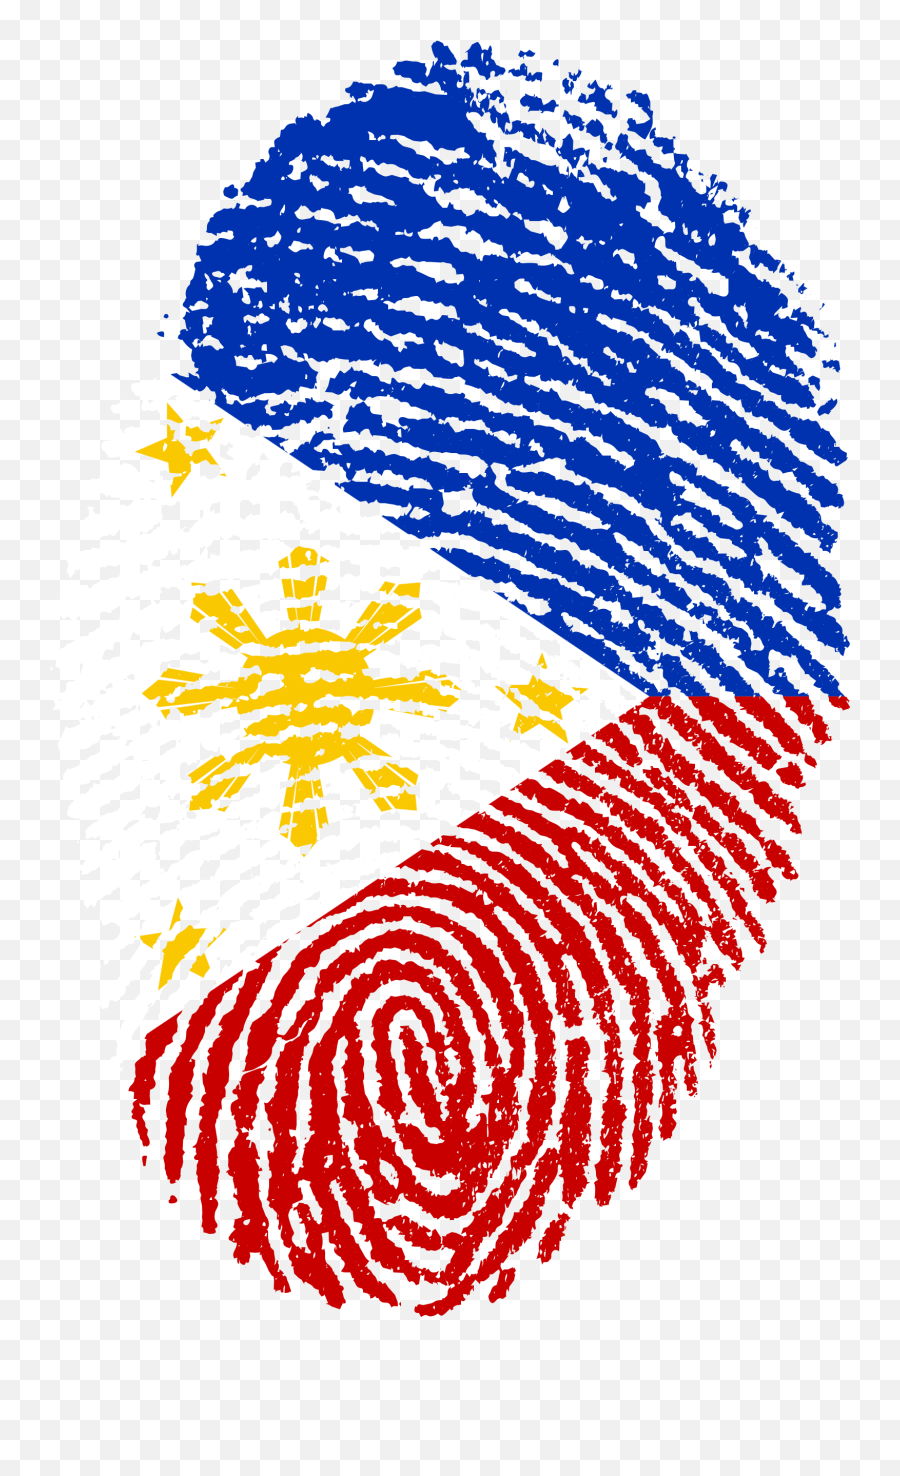 Fingerprint Of Philippines Flag Clipart Free Image Download - Philippine Flag Fingerprint Emoji,Emojis Arts And Crafts To Print